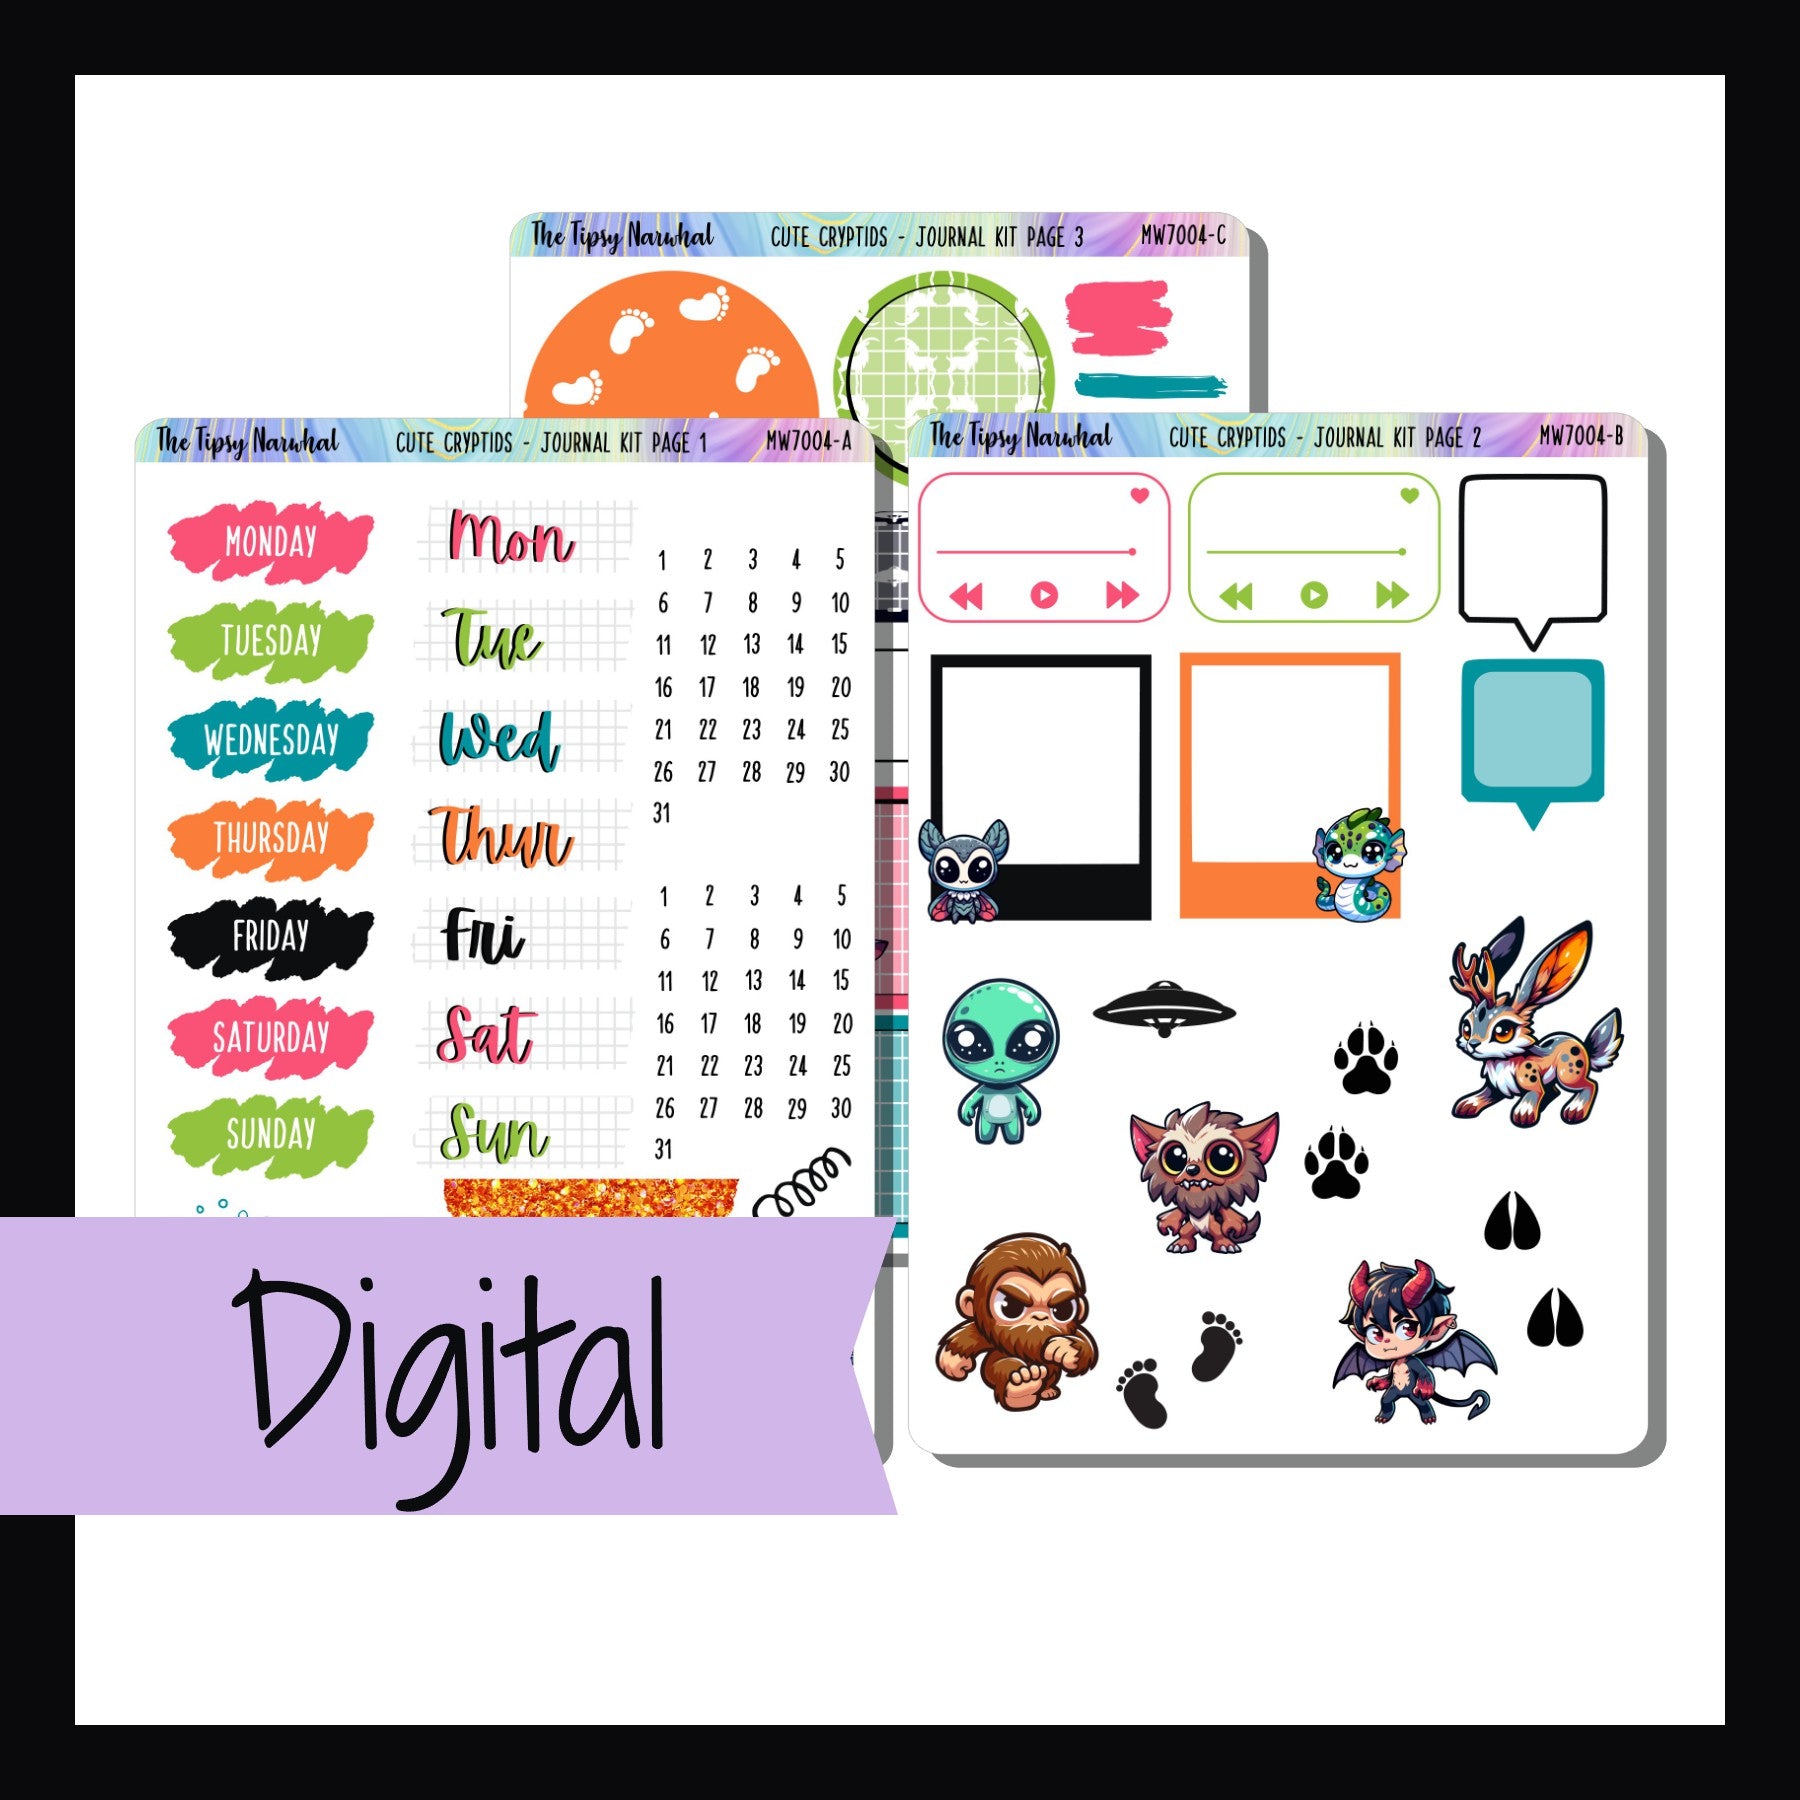 Digital Cute Cryptids Journal kit is a digital printable version of the Cute Cryptids Journal Kit.  It's a 3 page kit featuring bright colors and adorable cryptid creatures. 